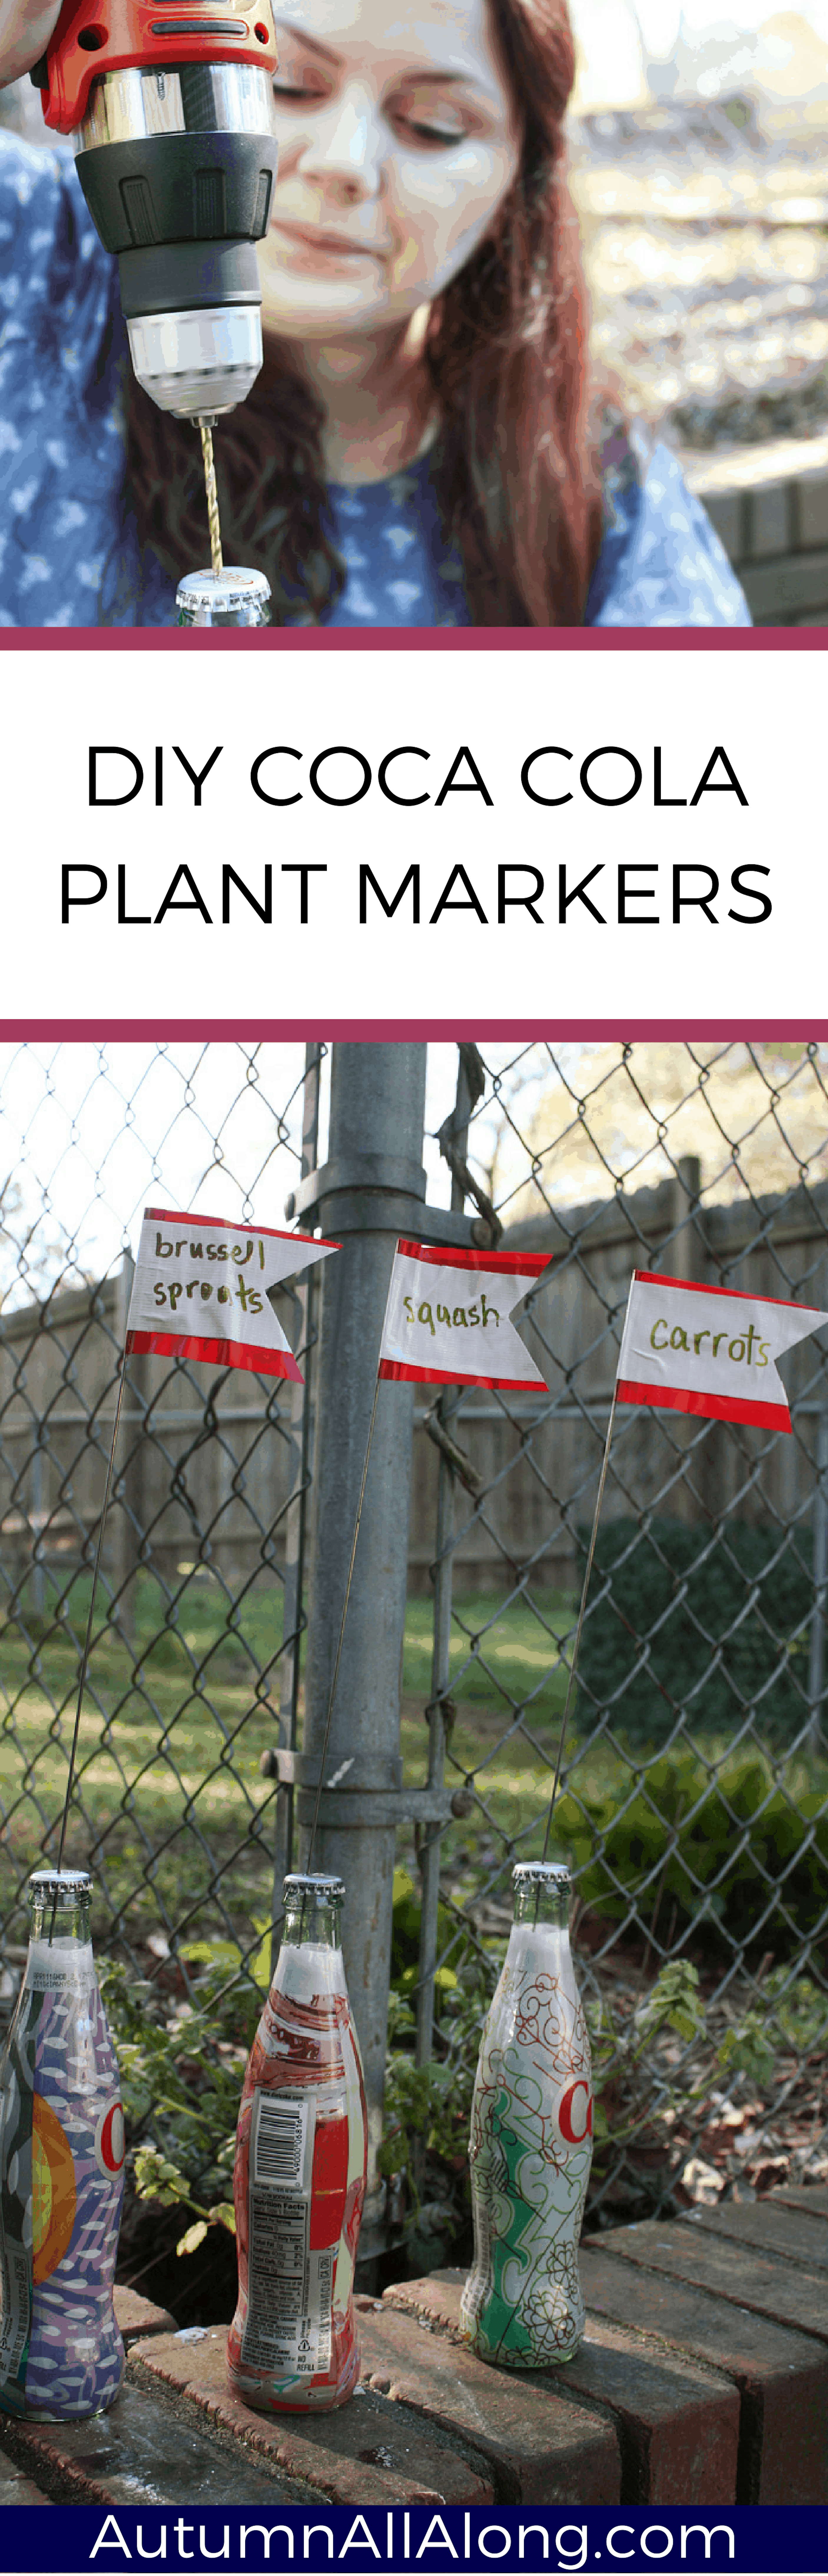  DIY garden plant markers: an easy way to recycle glass bottles and add more color to your yard! | via Autumn All Along